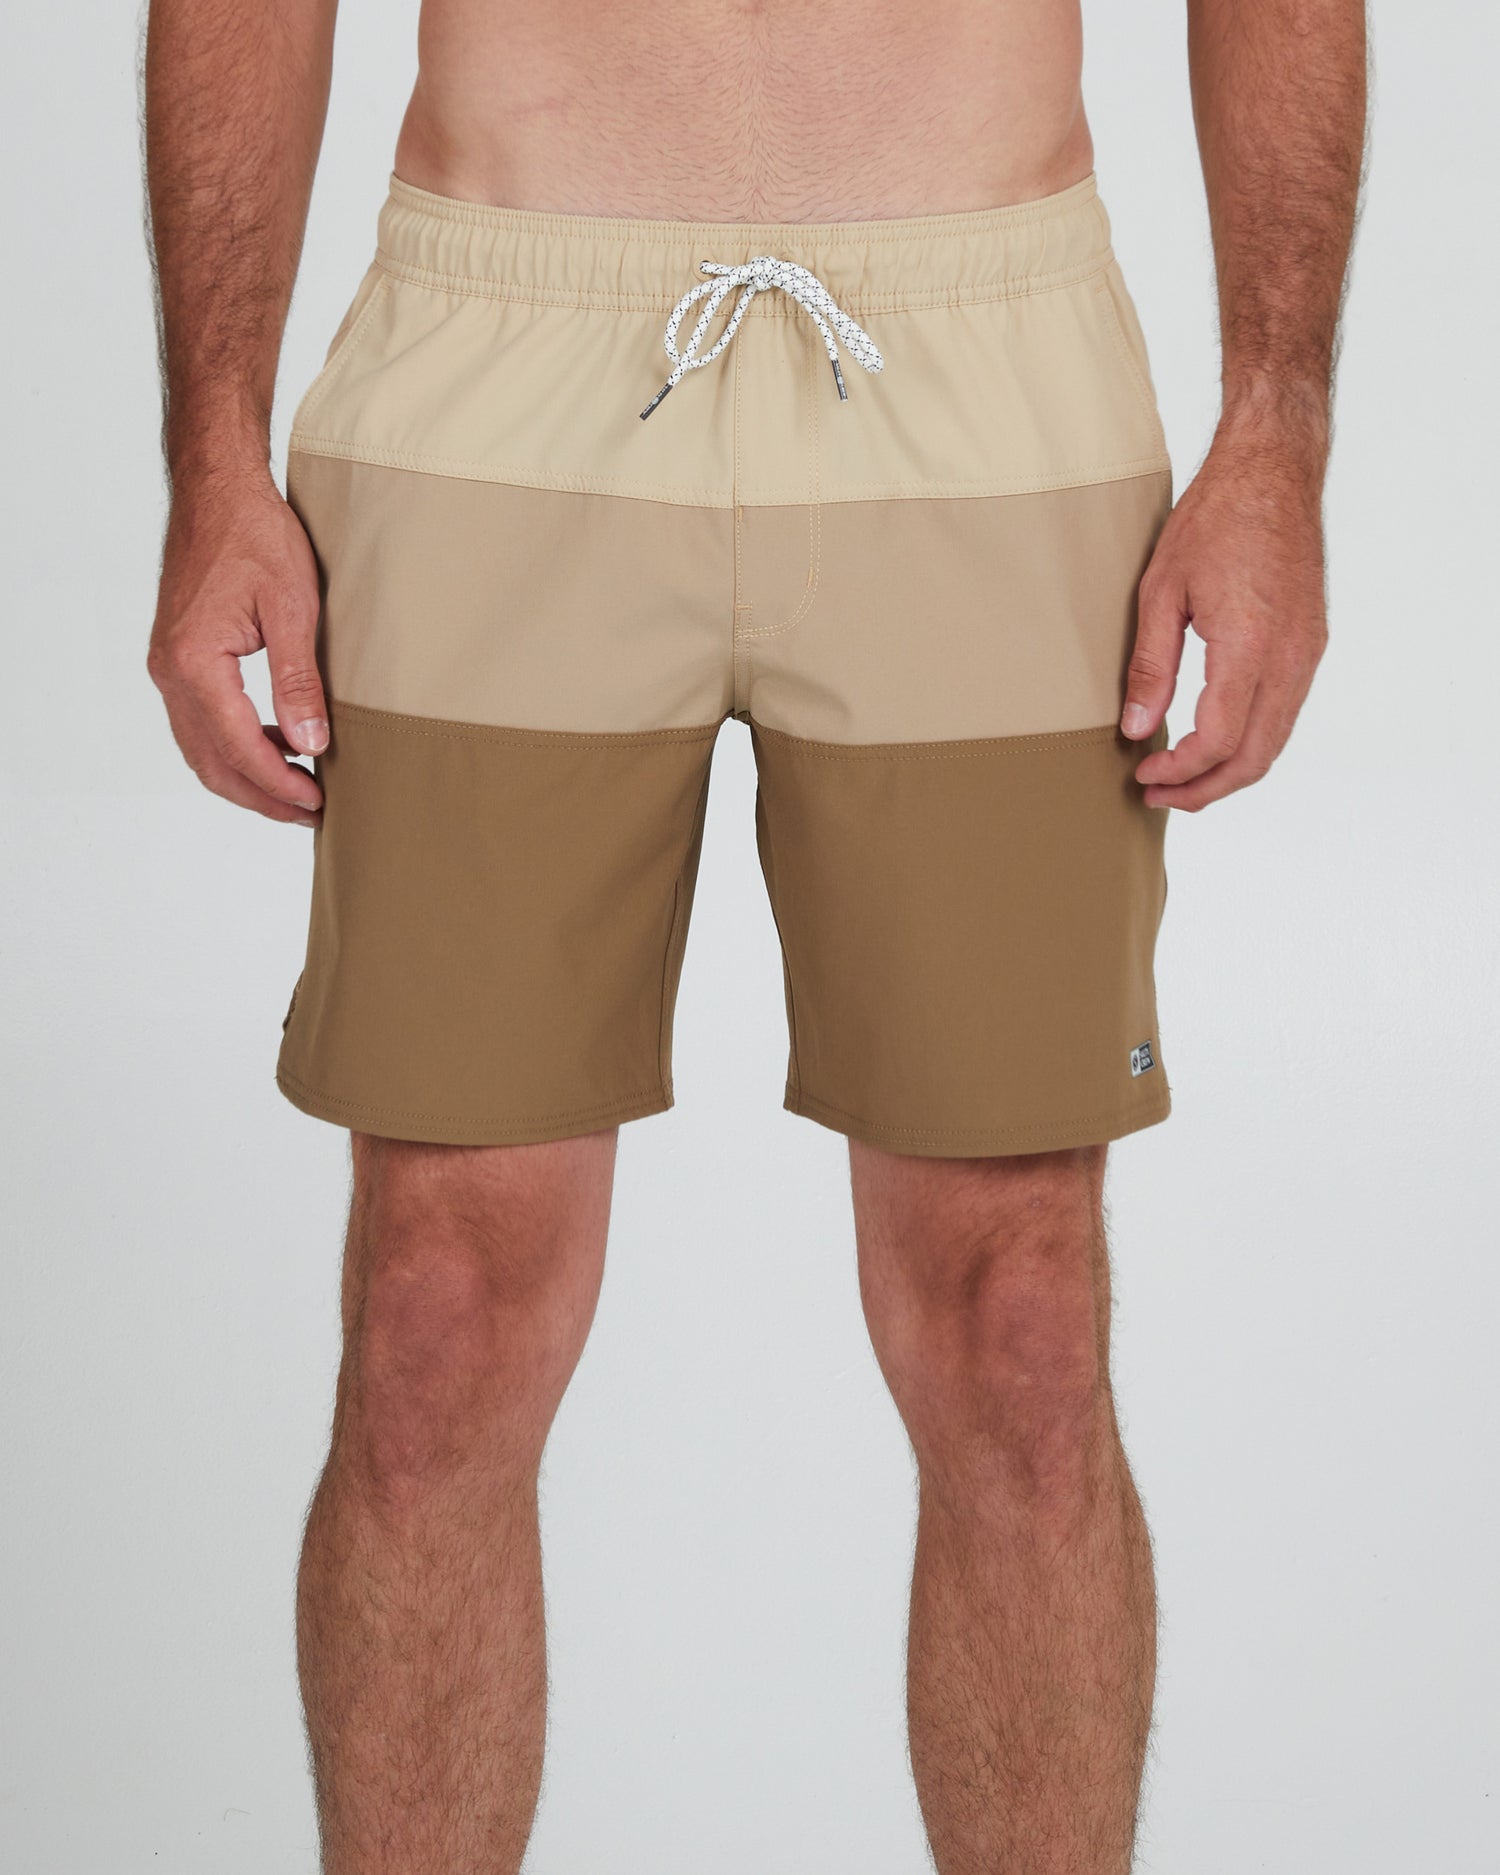 On body front of the Beacons 2 Sand Elastic Boardshort